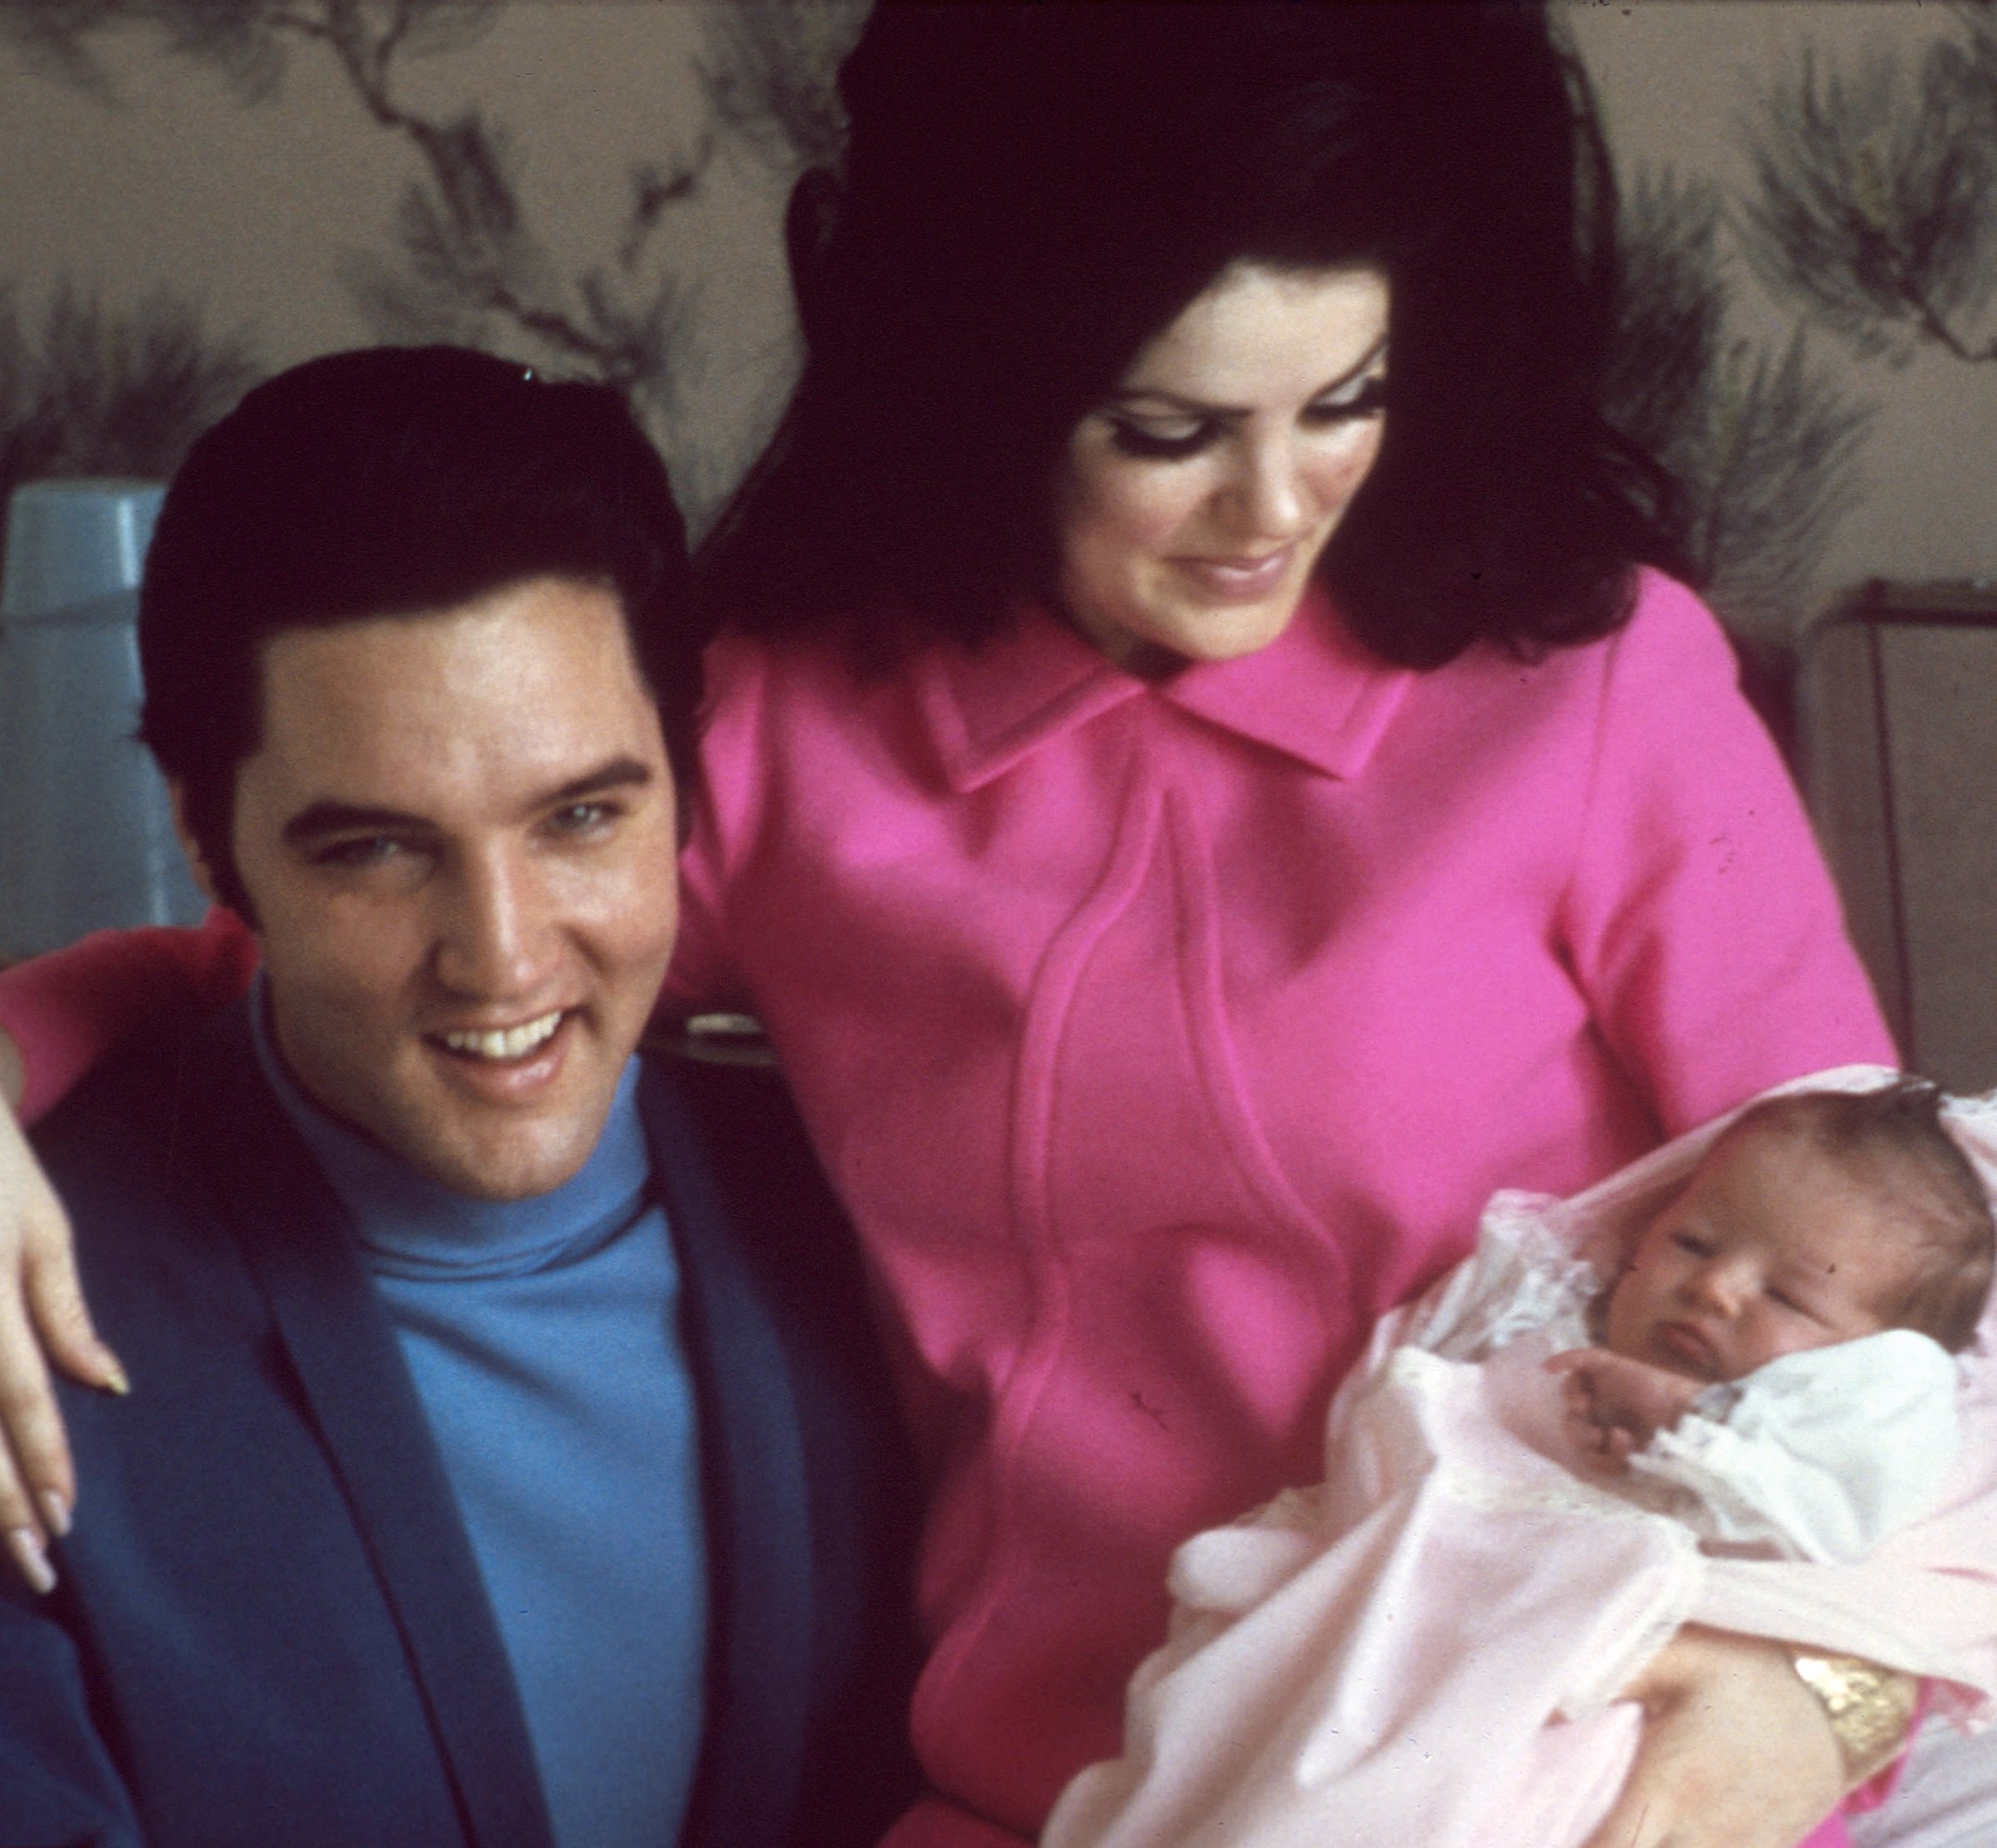 Elvis Presley with wife Priscilla Presley and their 4-day-old daughter, Lisa Marie Presley